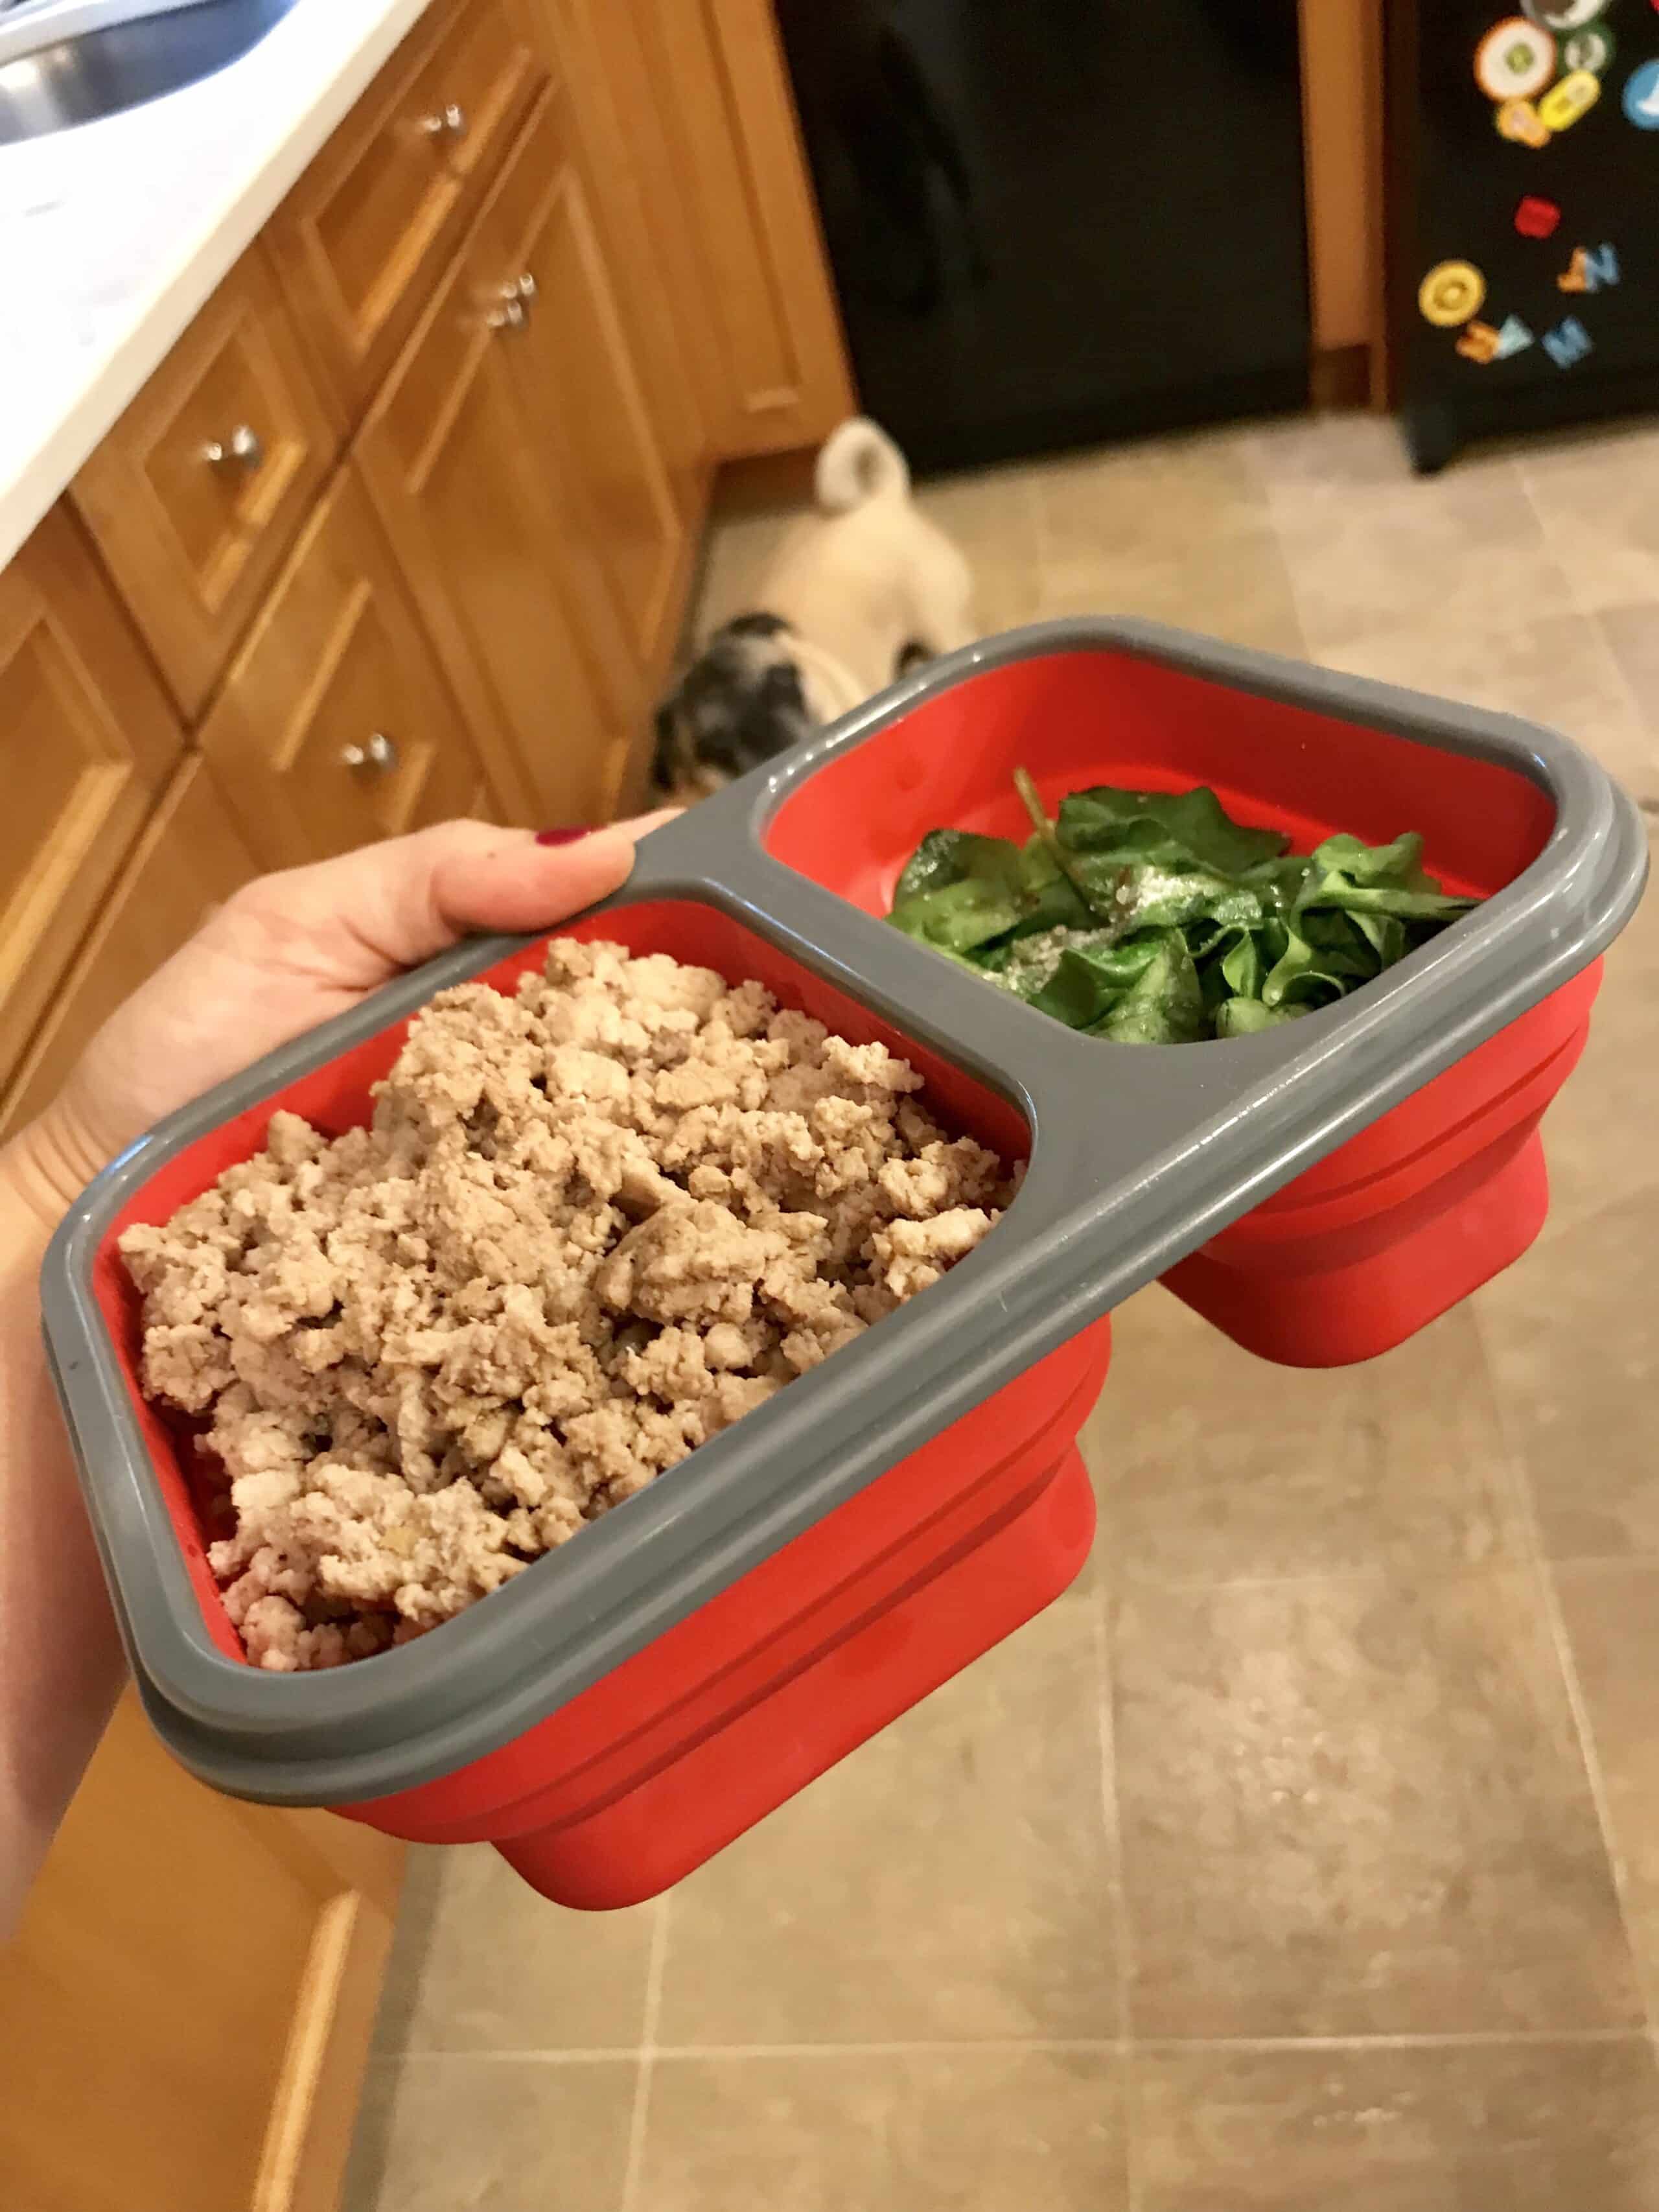 collapsible meal prep bowl for travel on a plane; Meal Prep Hacks for a Long Flight